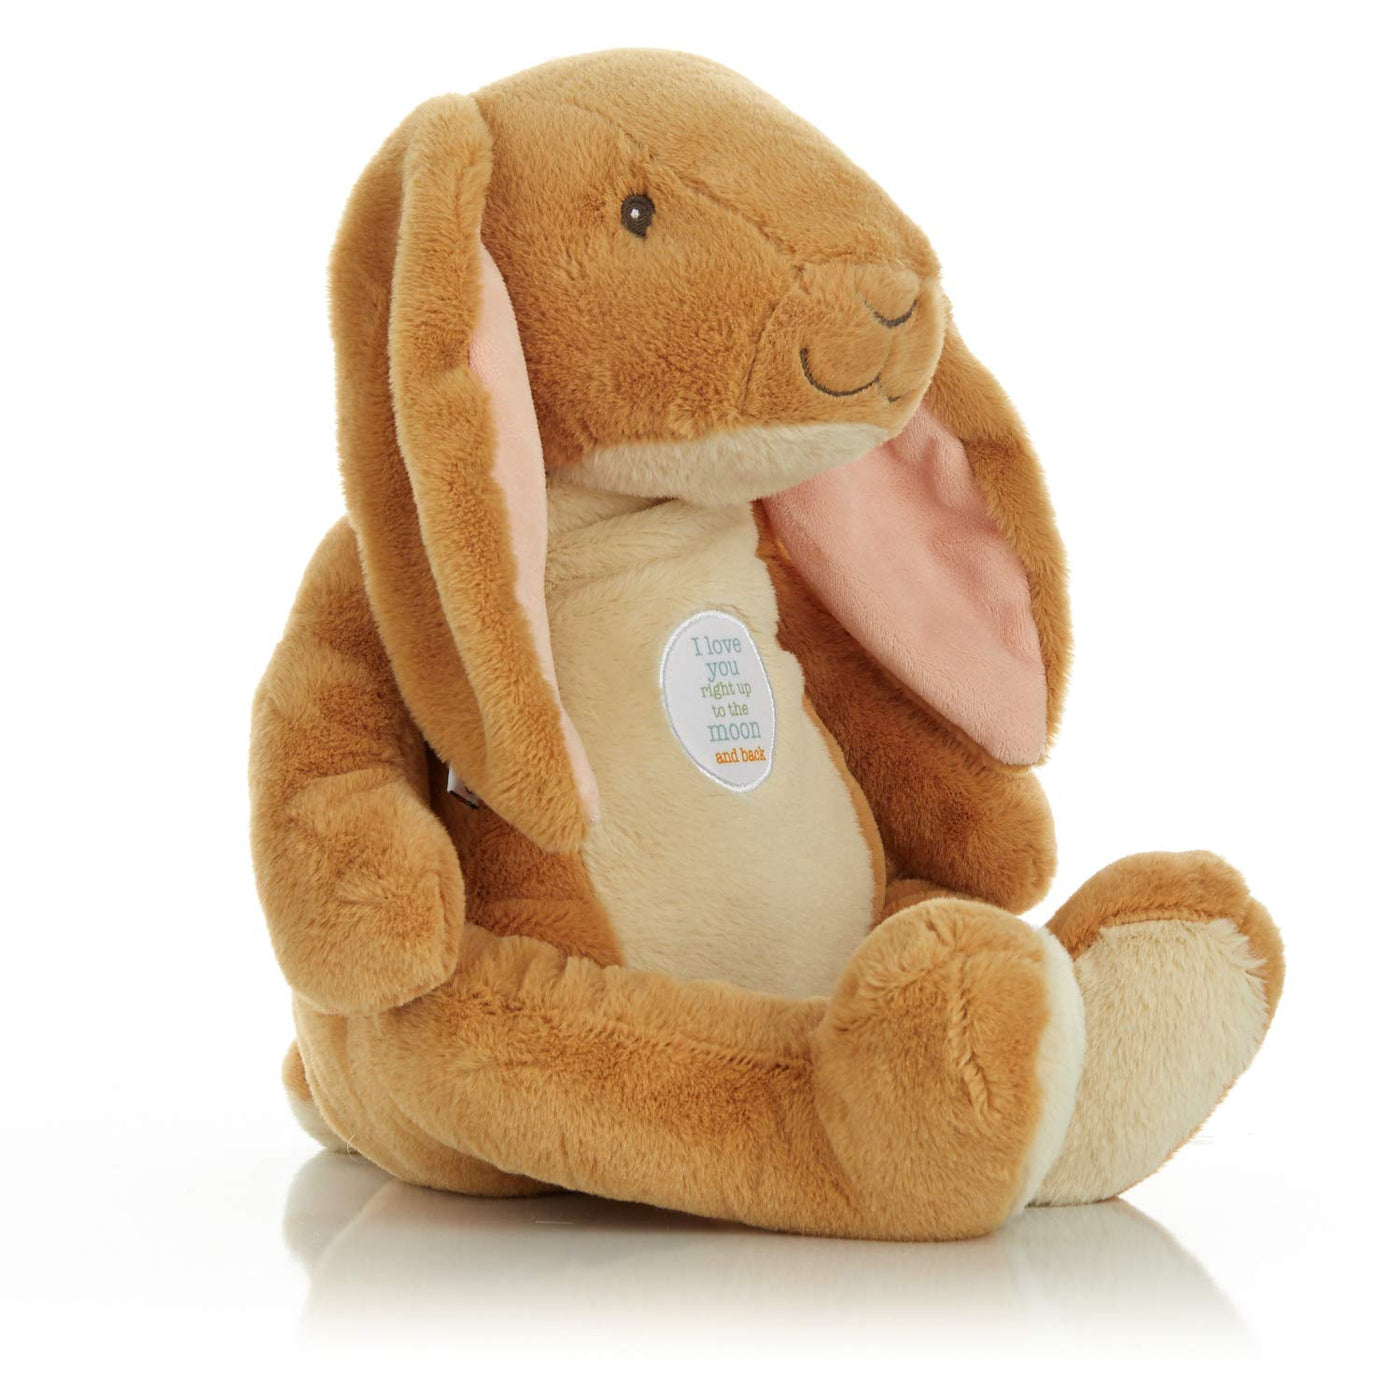 Guess How Much I Love You - Nutbrown Hare Stuffed Animal Plush Toy 16 inches